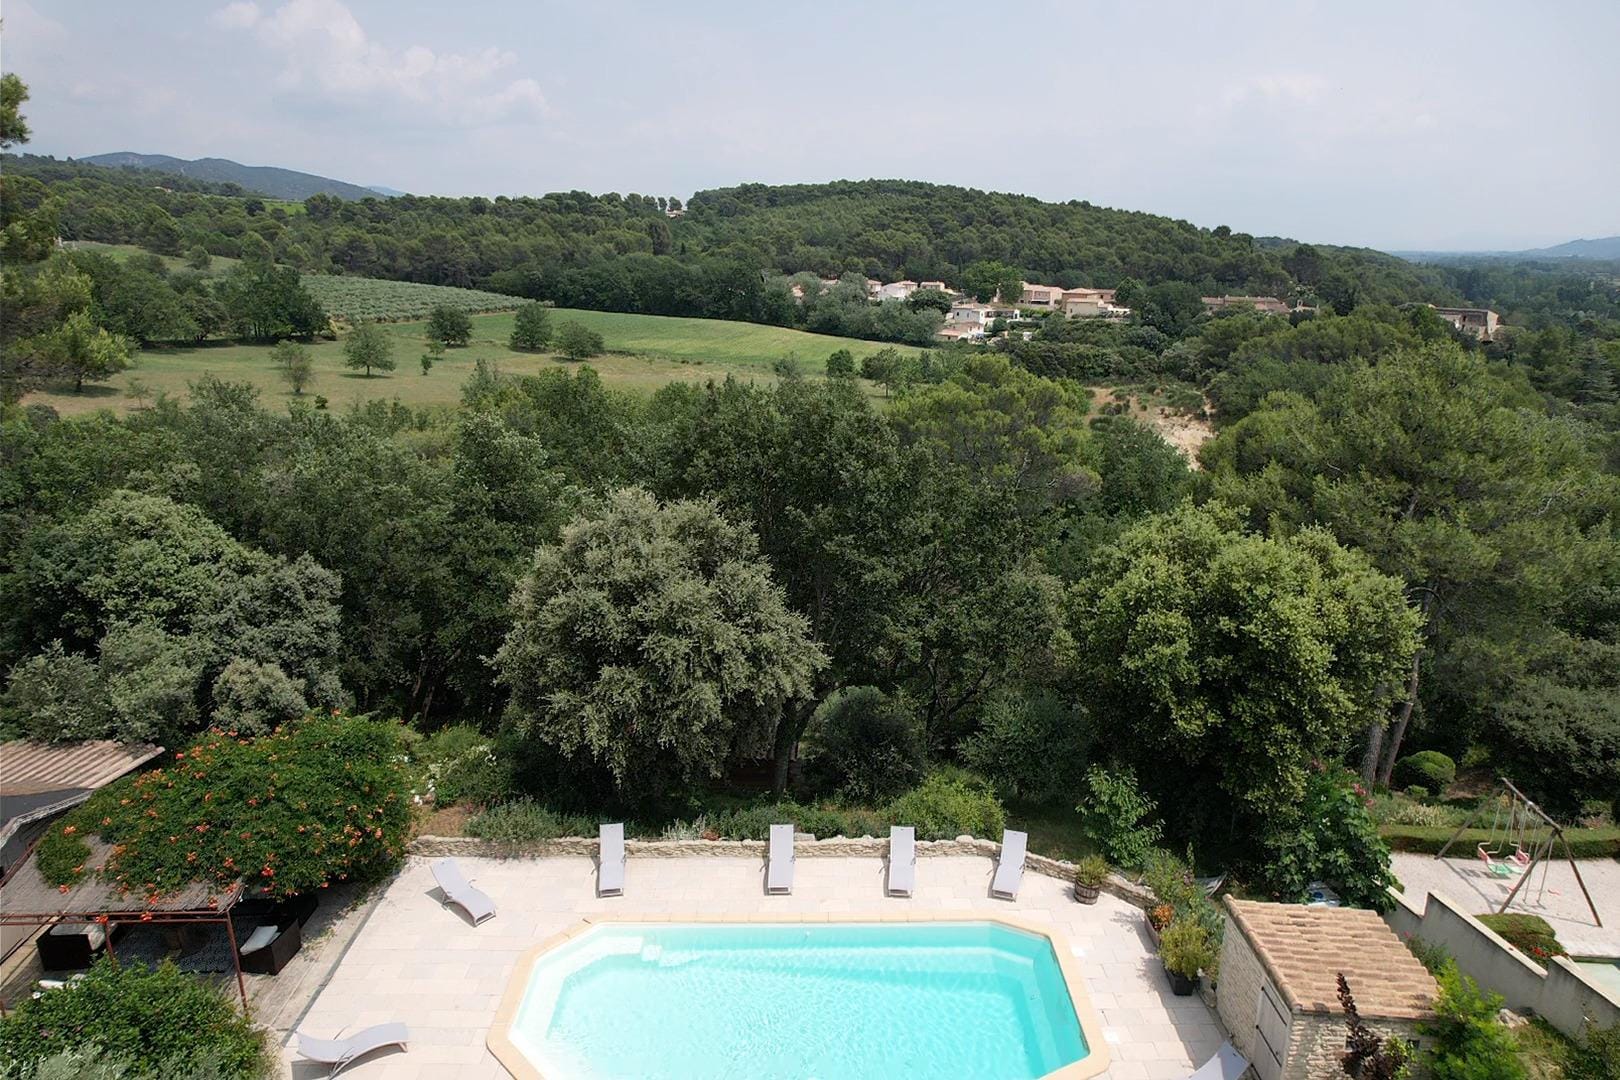 Property Image 2 - villa with pool and beautiful view in the luberon in pujet sur durance - 10